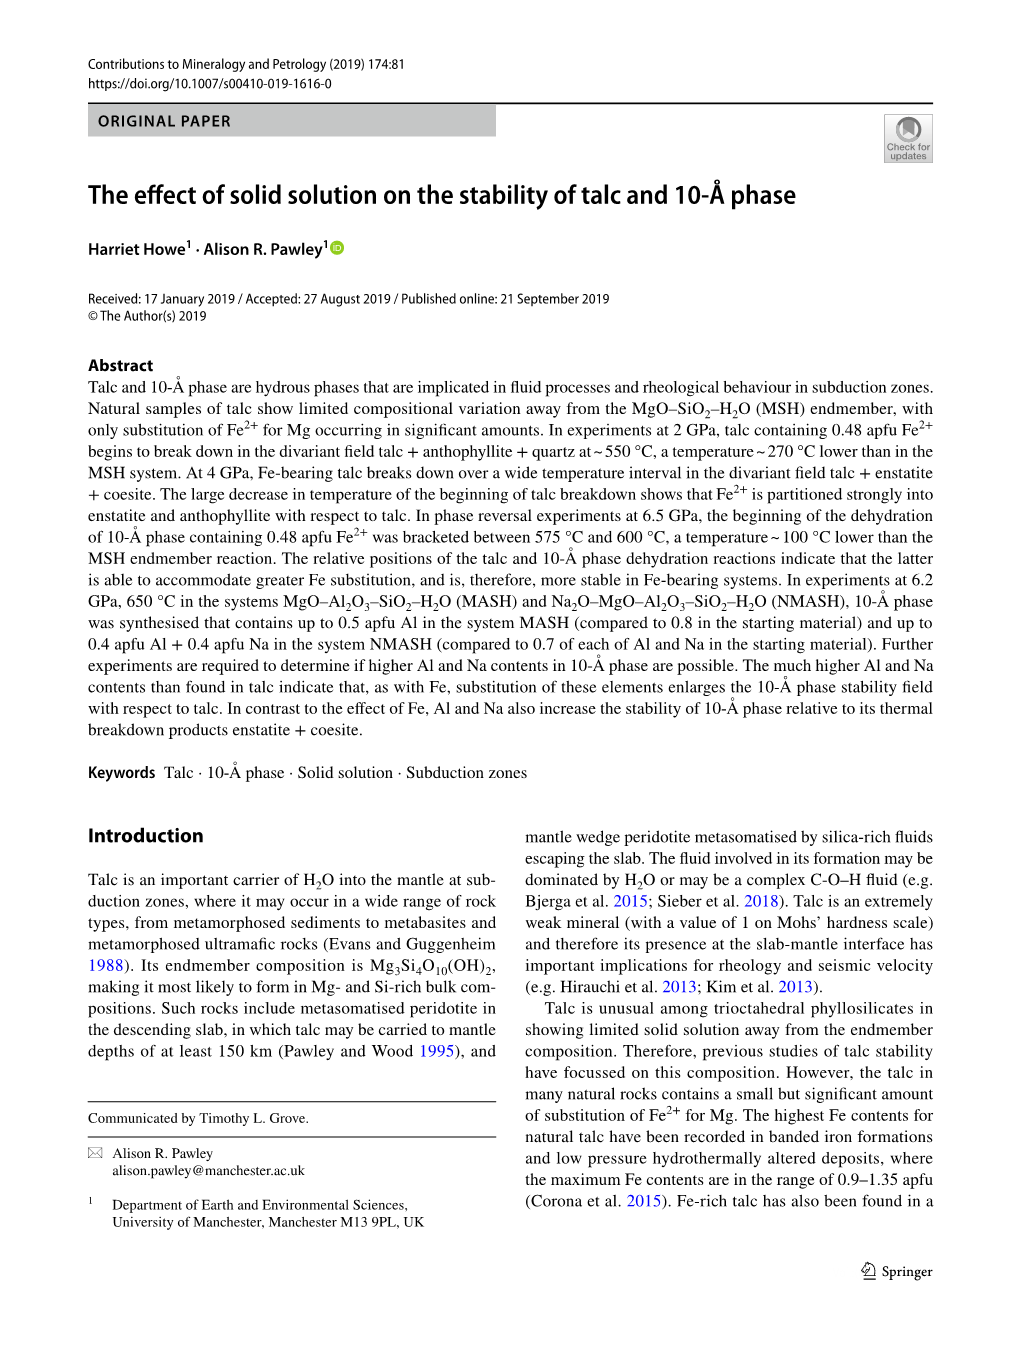 The Effect of Solid Solution on the Stability of Talc and 10-Е Phase